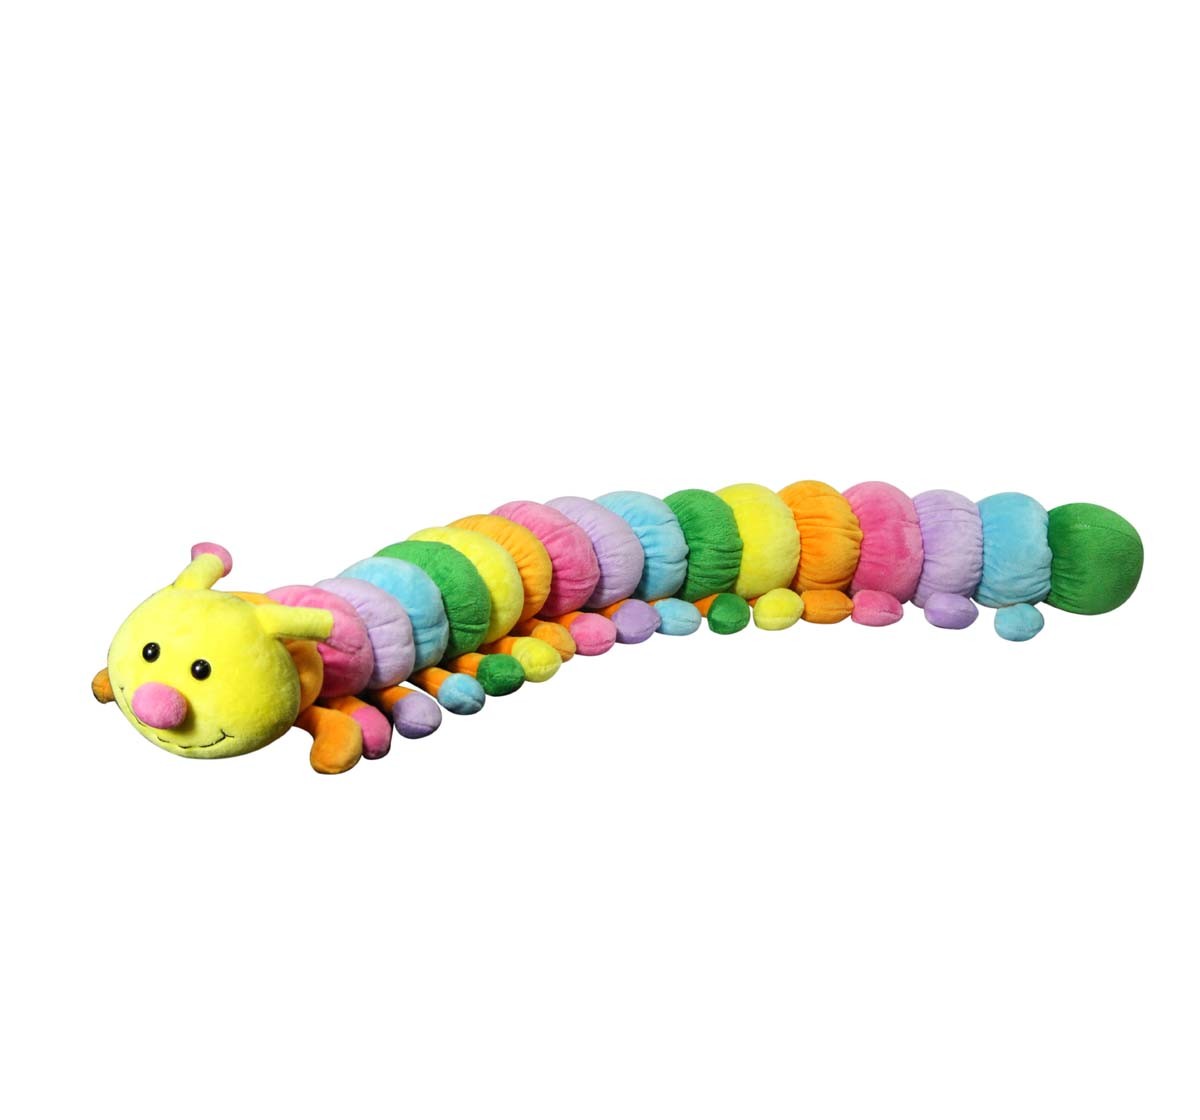  Soft Buddies Caterpillar Jungle Animal Car Rear Tray Table (Xl) Quirky Soft Toys for Kids age 12M+ 12.7 Cm 